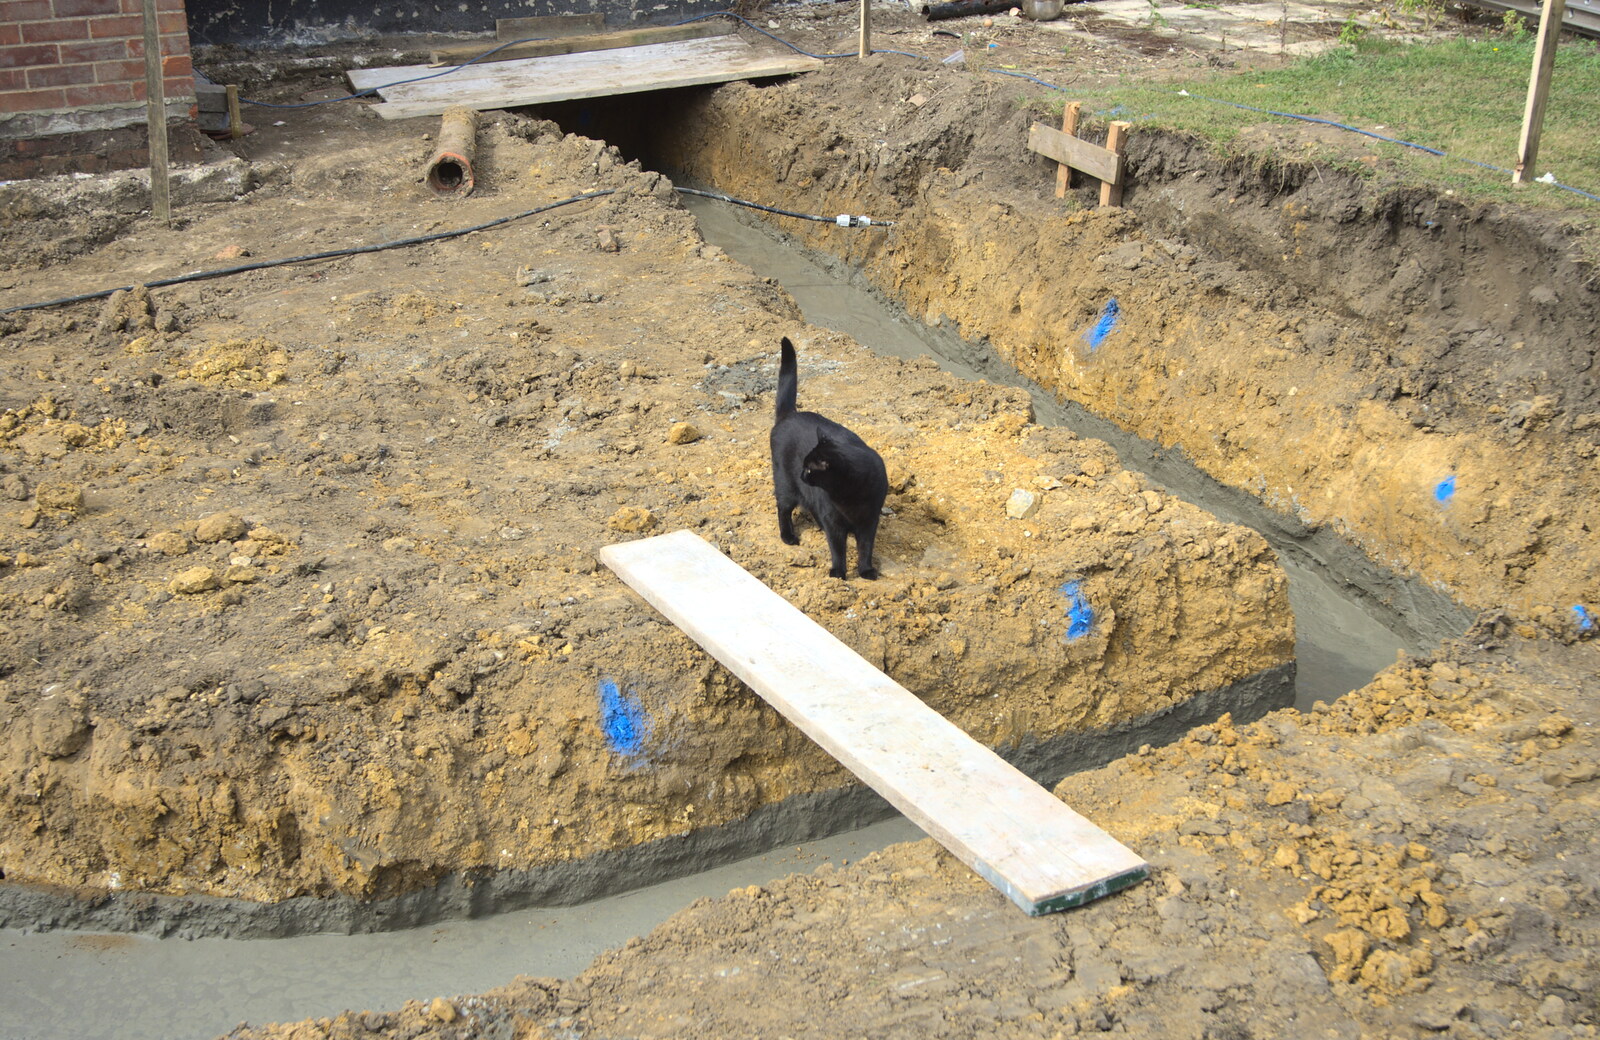 Millie explores the footings from Grand Designs: Building Commences, Brome, Suffolk - 8th August 2013